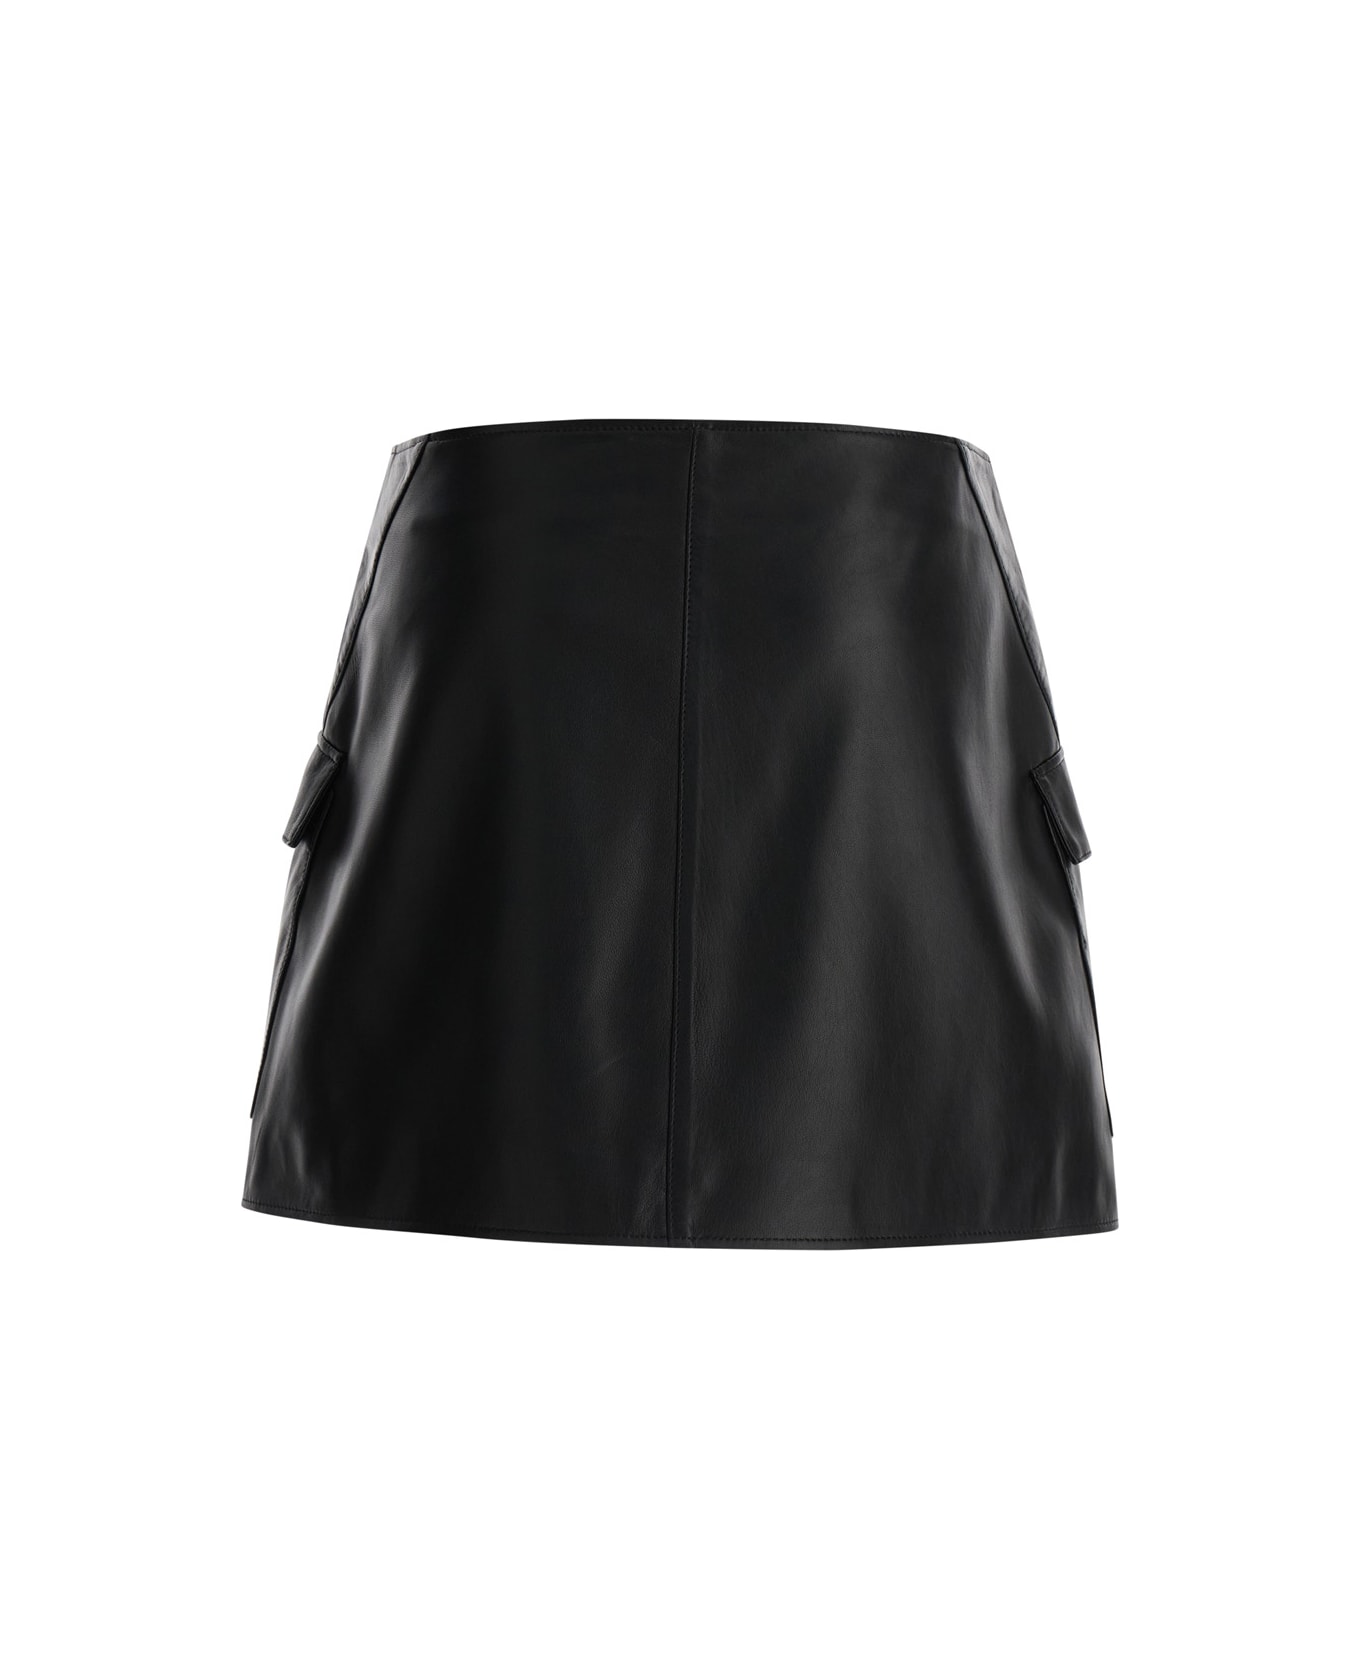 ARMA Black Wallet Skirt With Pockets In Leather Woman - Black